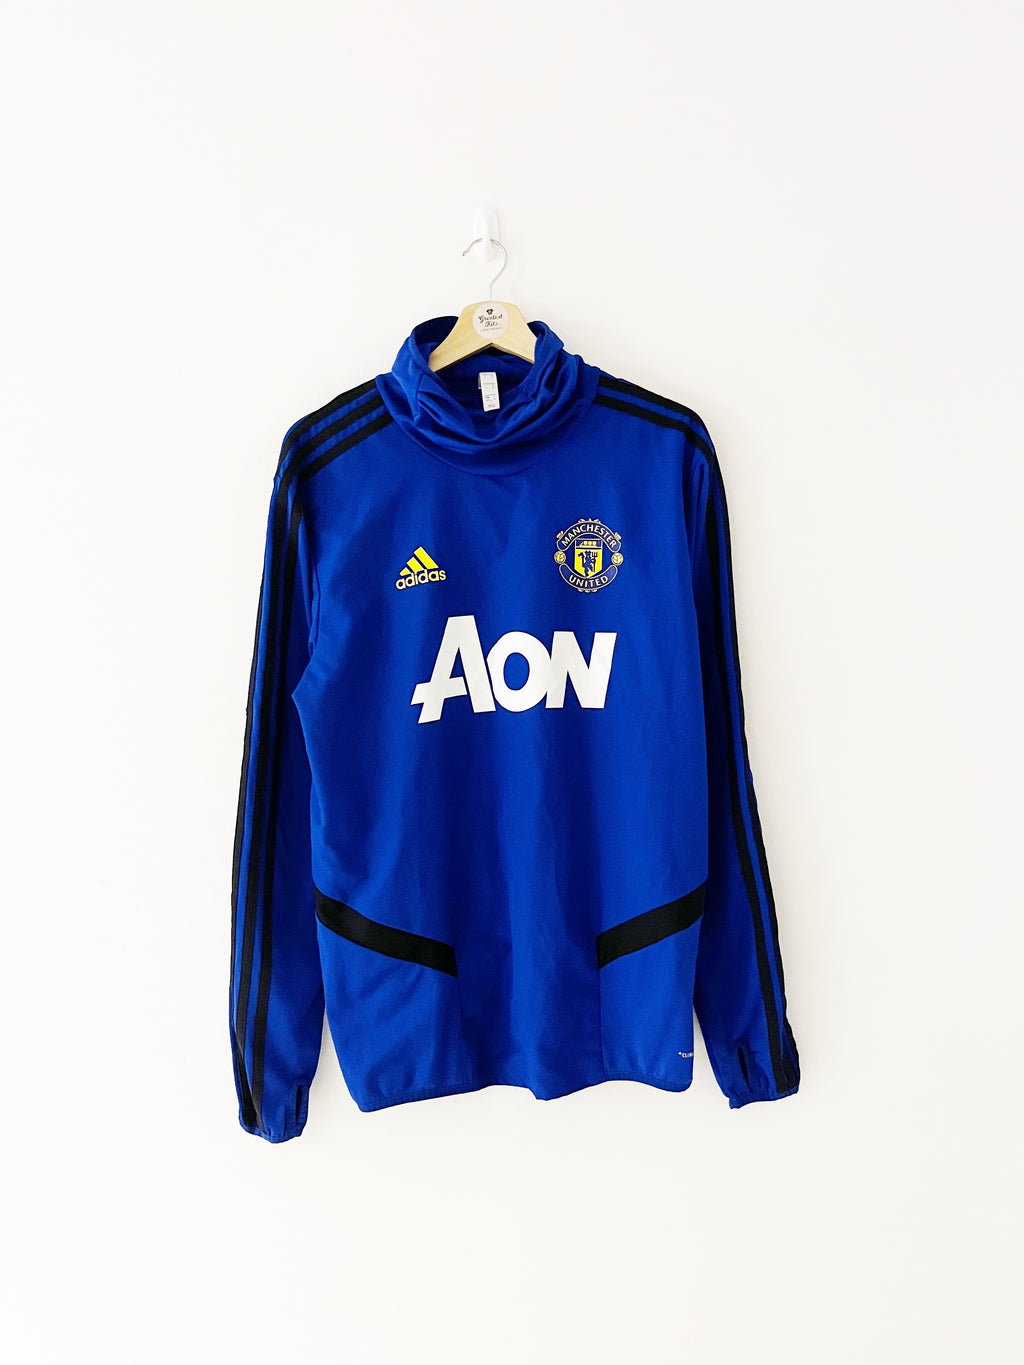 2018/19 Manchester United Training Top (S) 9/10